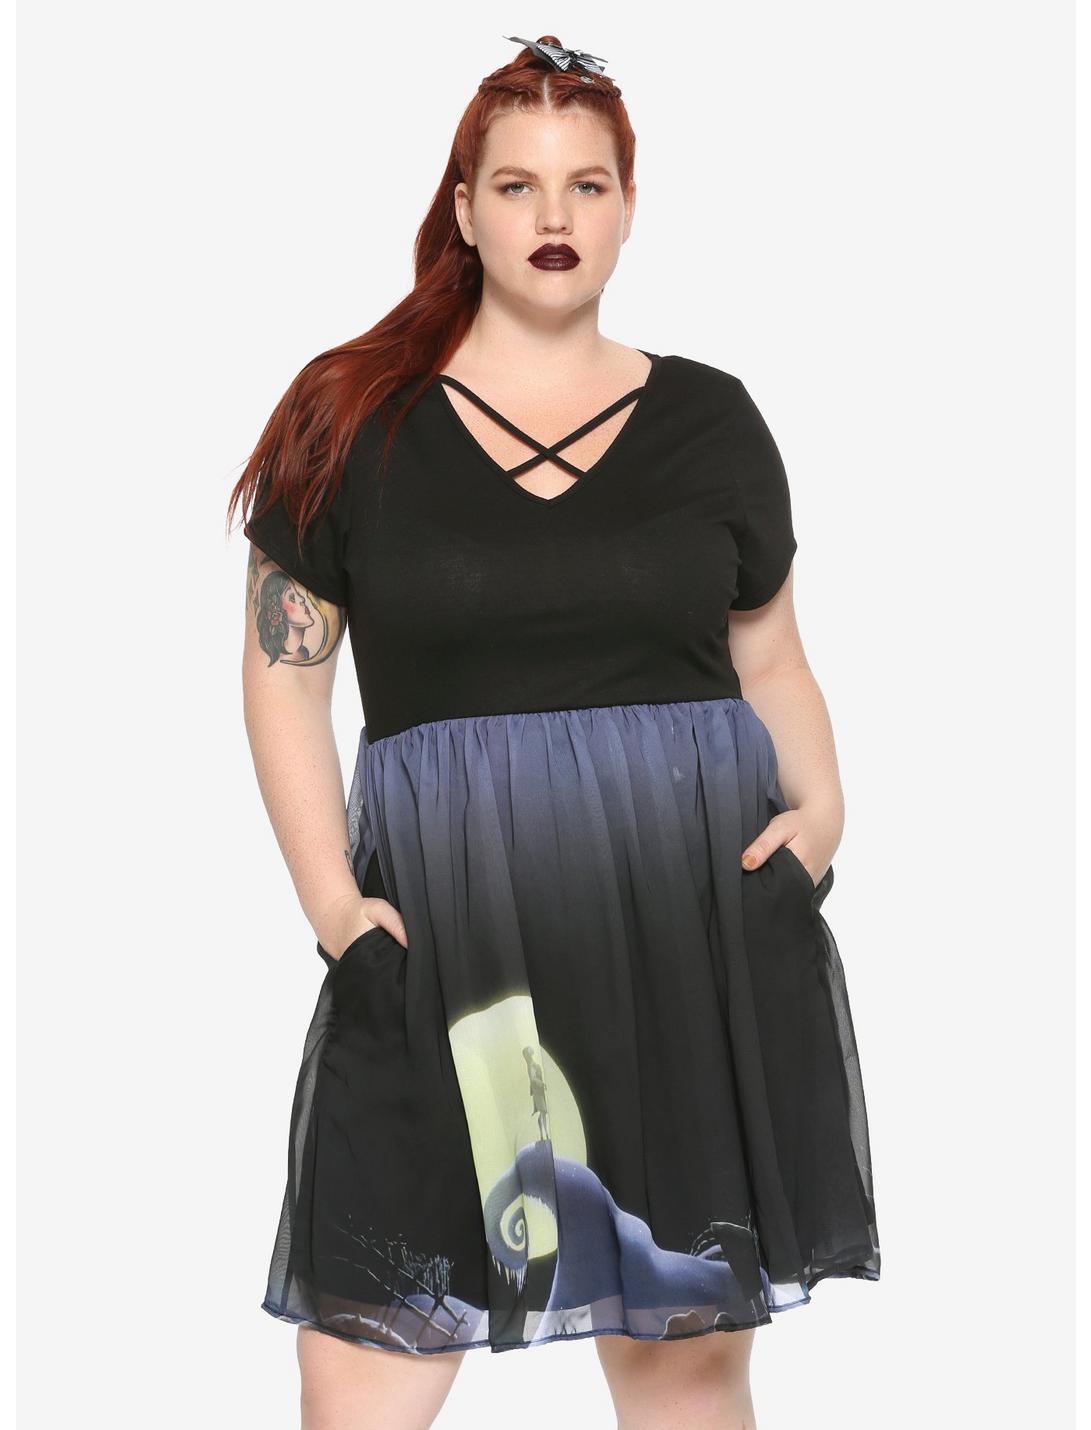 The Nightmare Before Christmas Moonlight Party Dress Plus Size, MULTI, hi-res